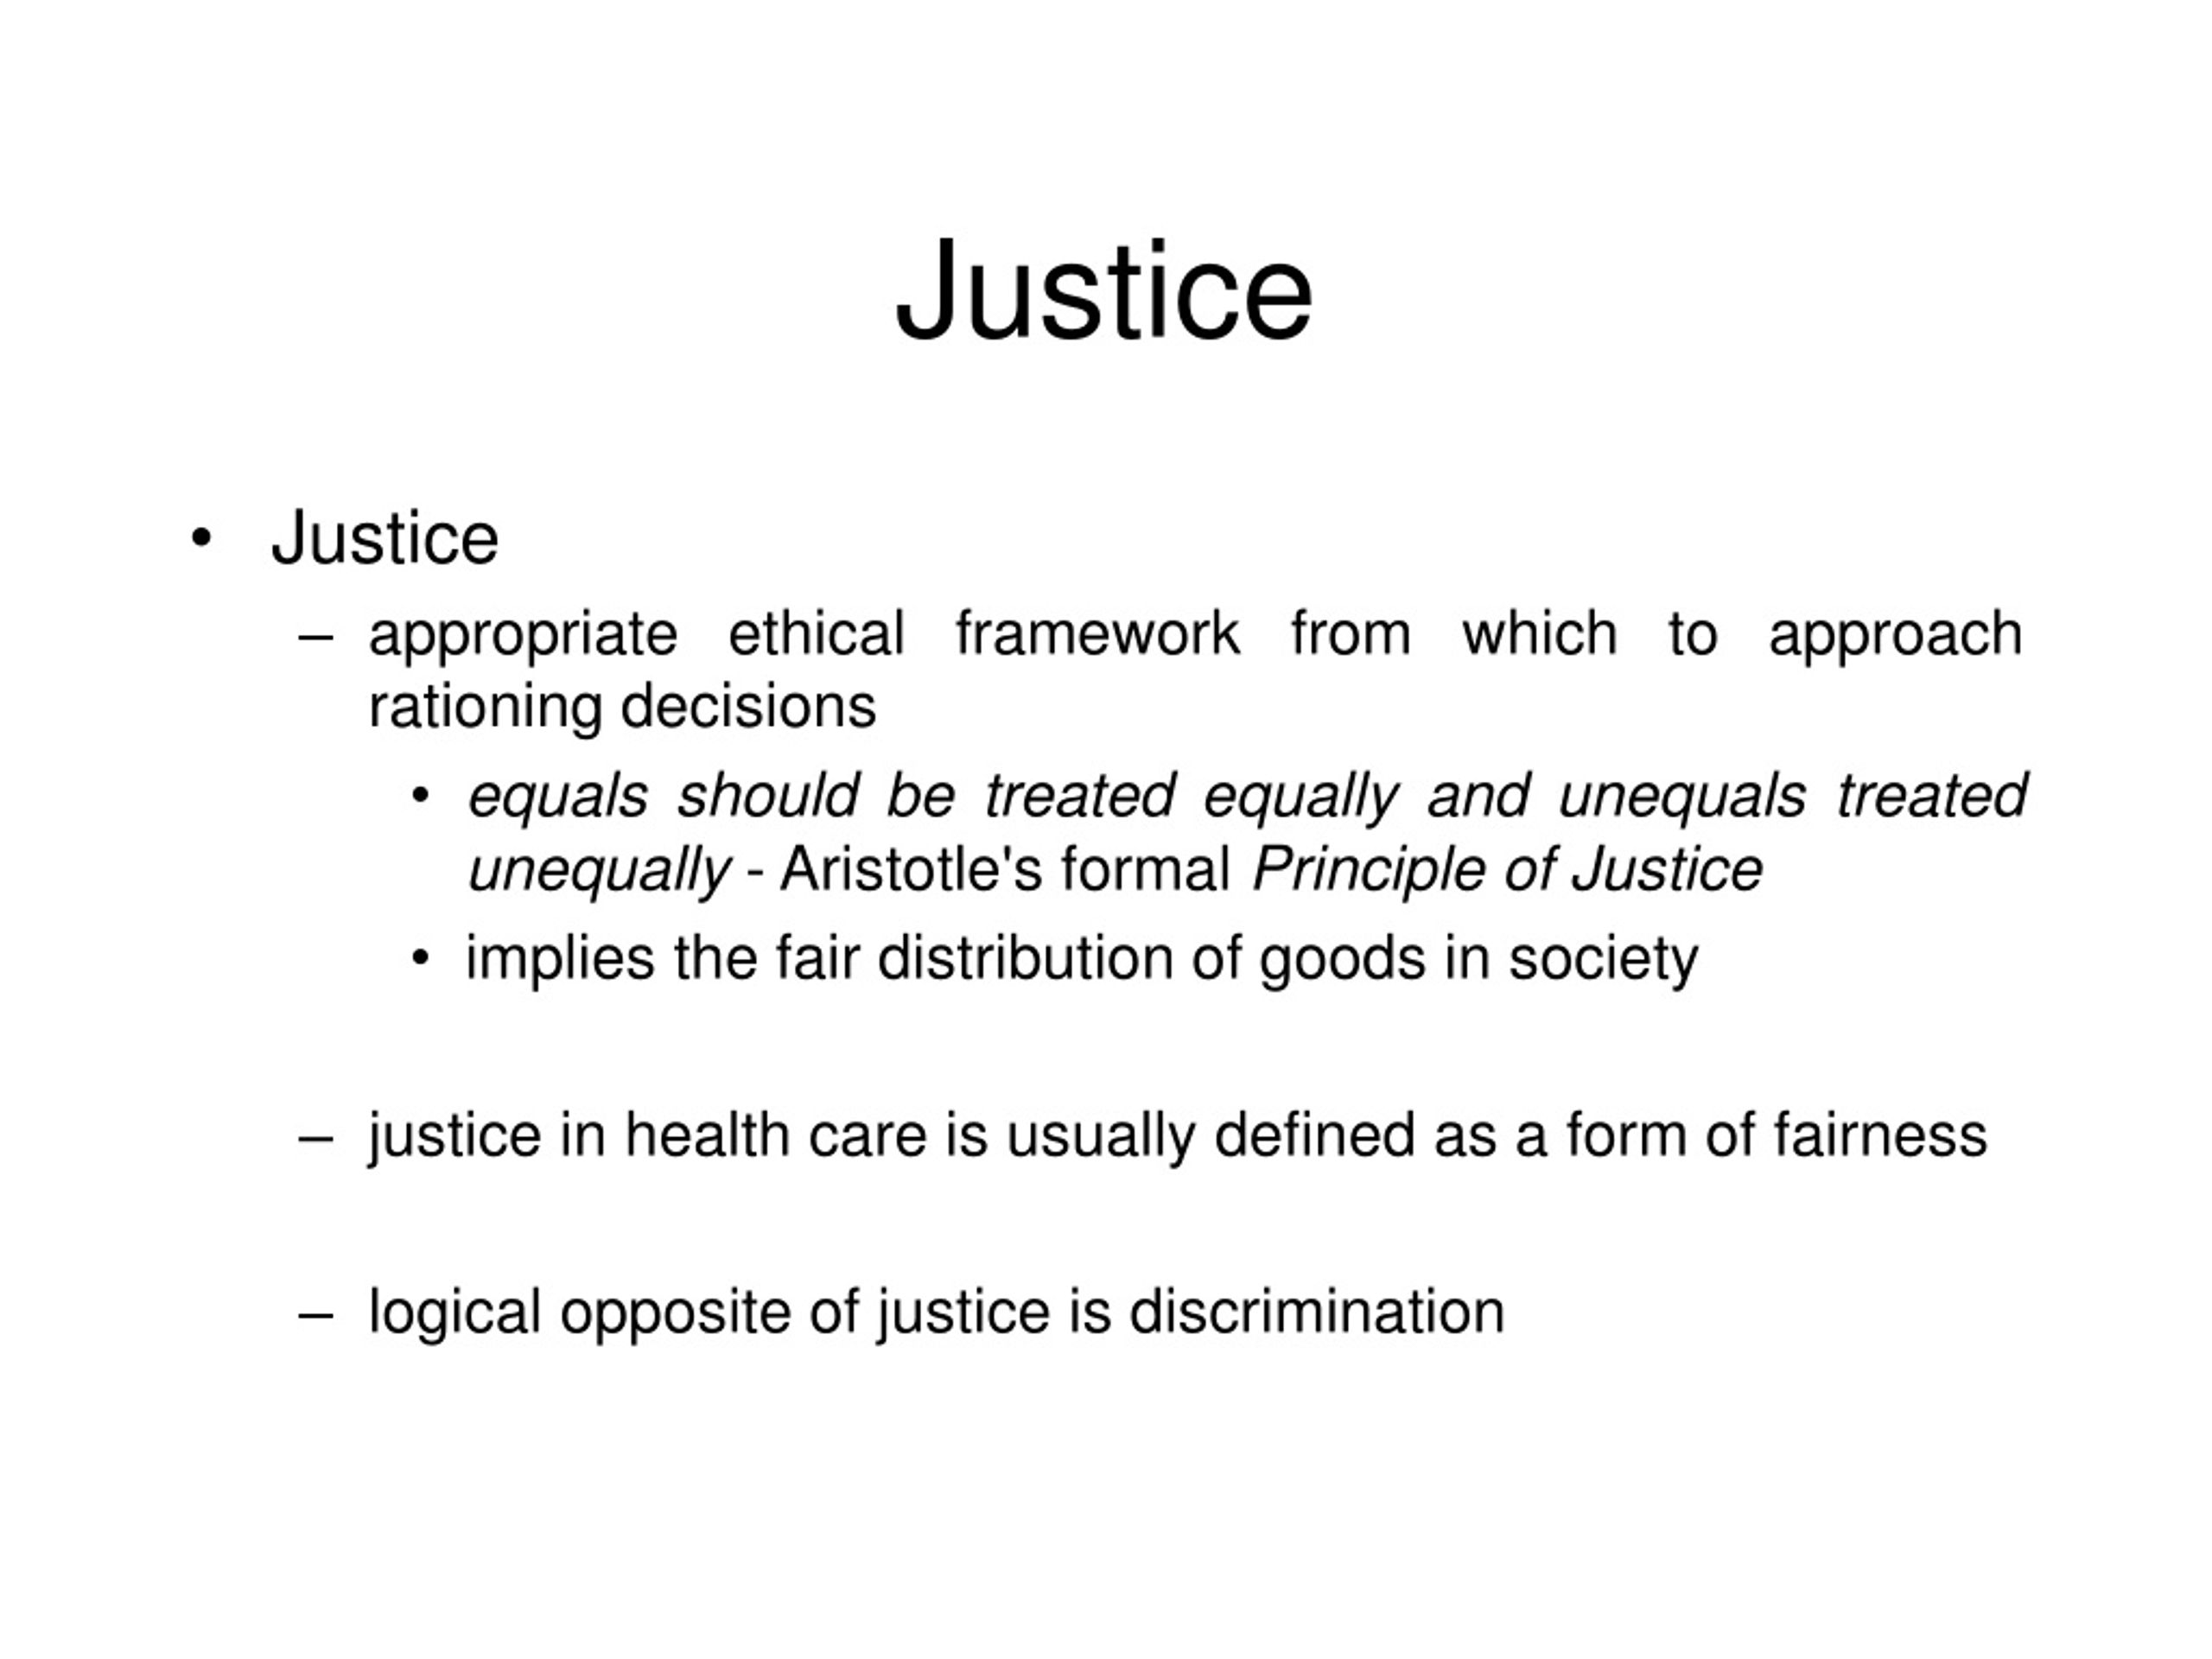 research justice meaning